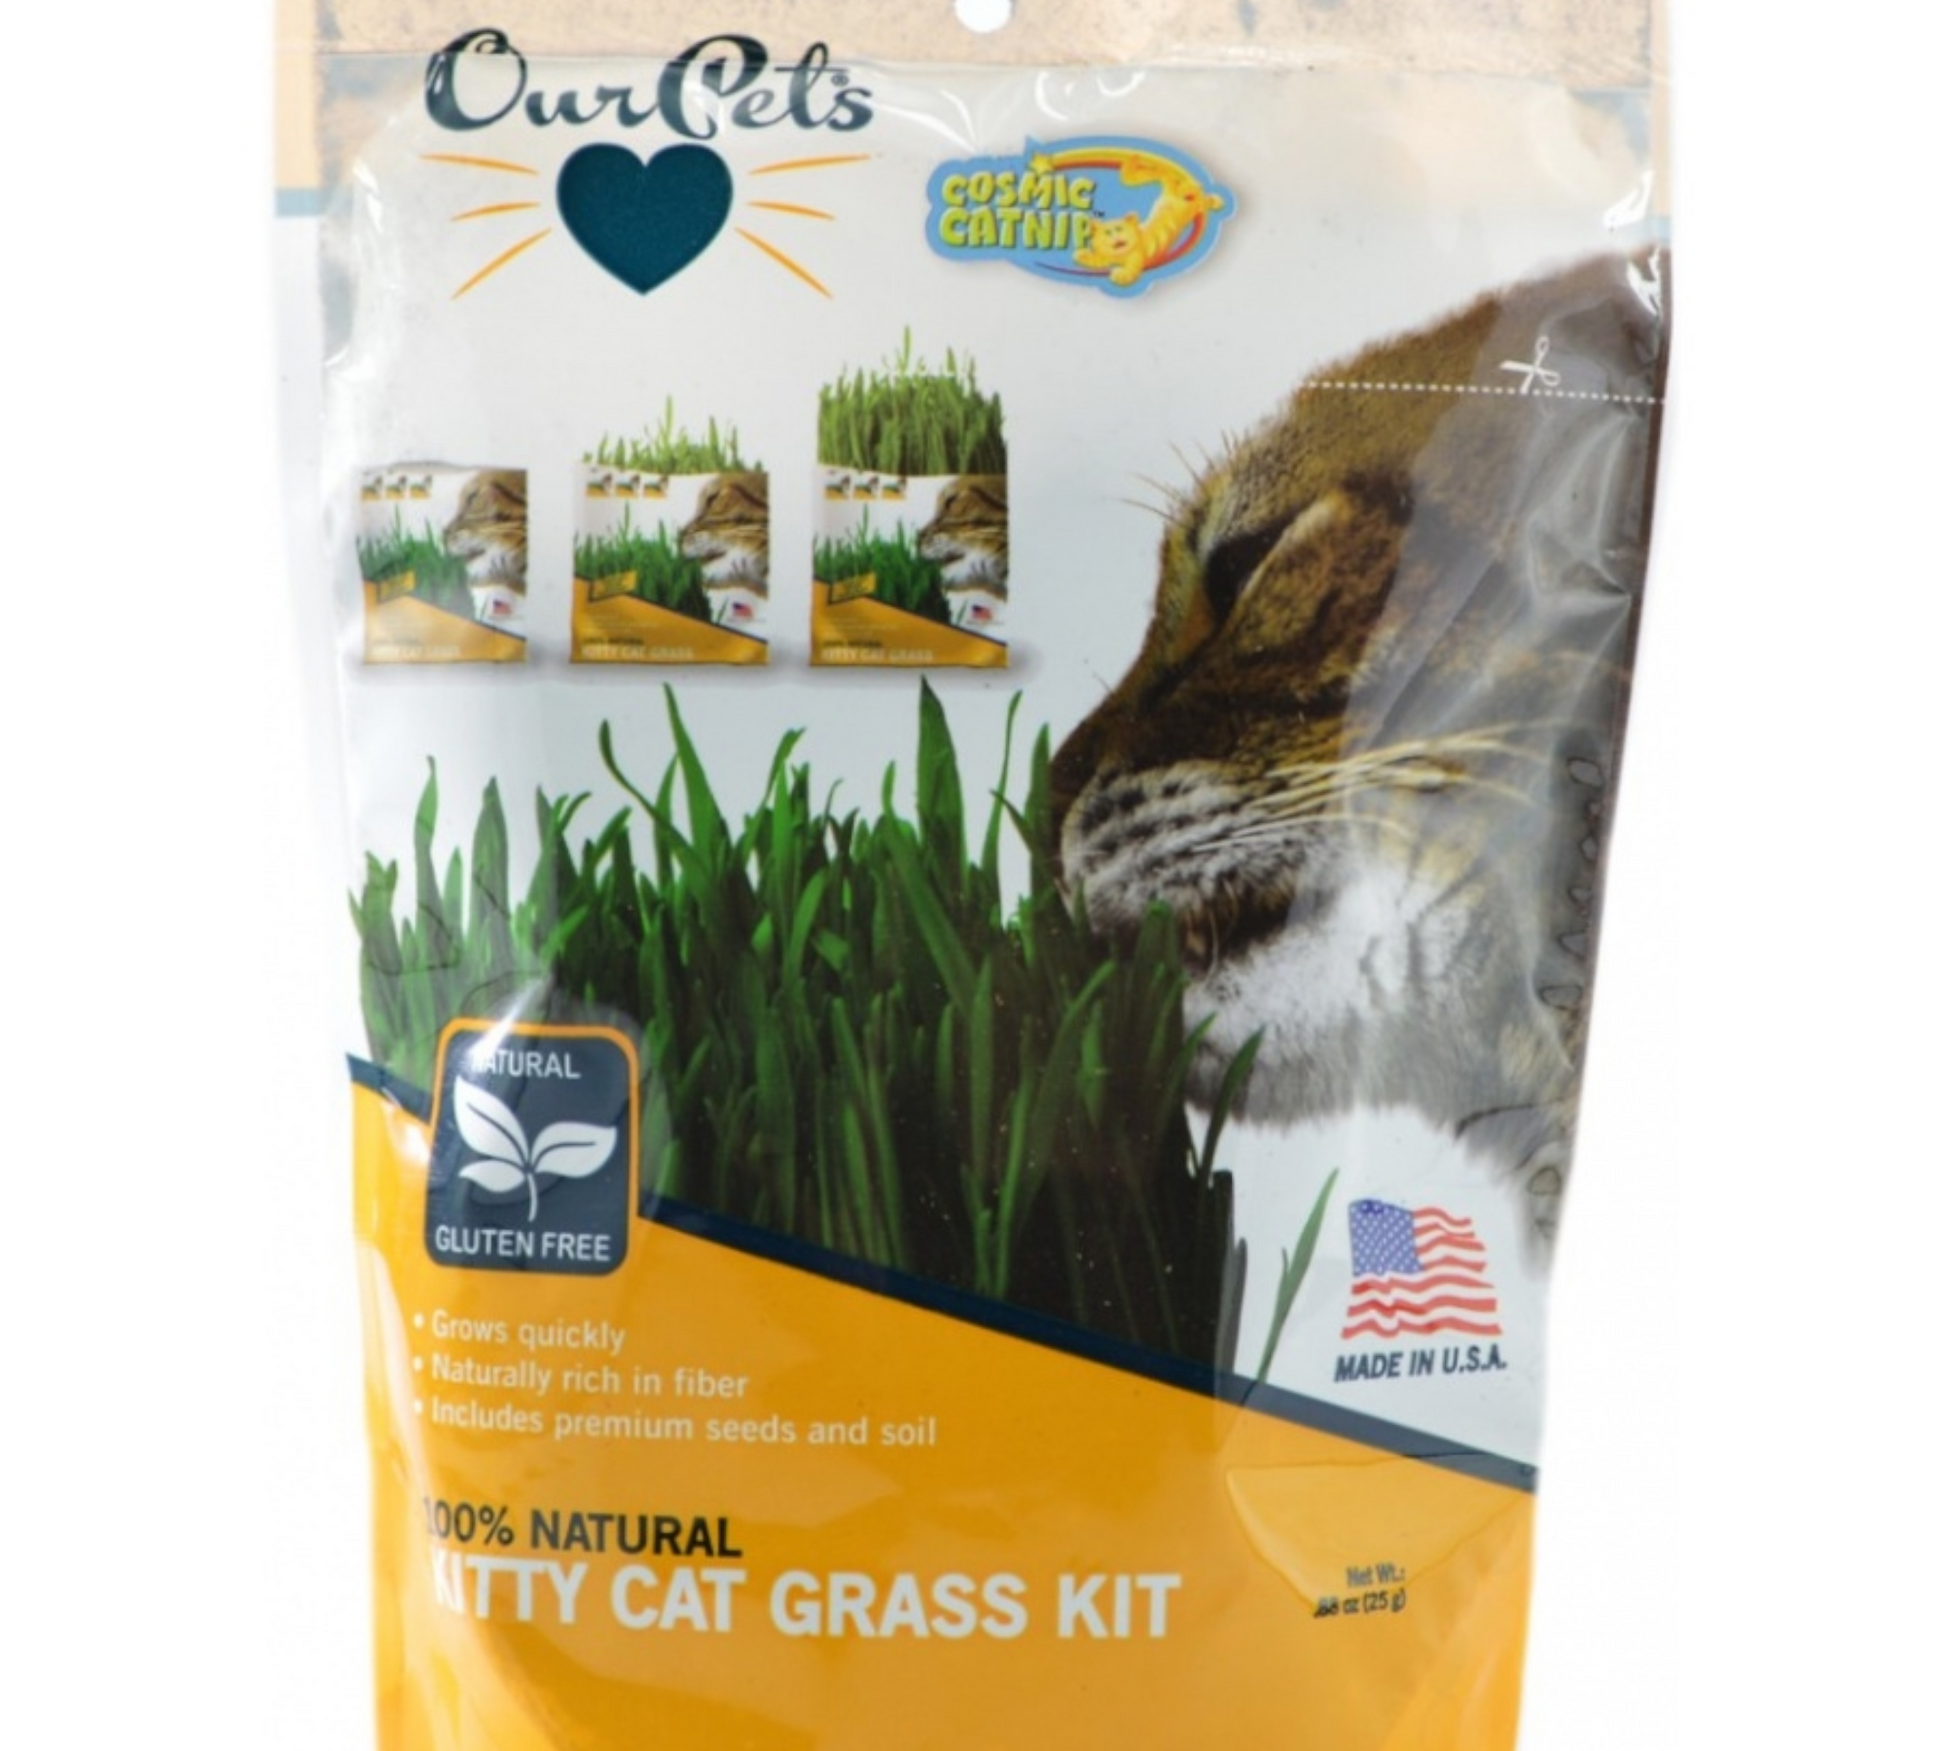 Canine's World Cat Grass OurPets Cosmic Catnip 100% Natural Kitty Cat Grass Kit OurPets